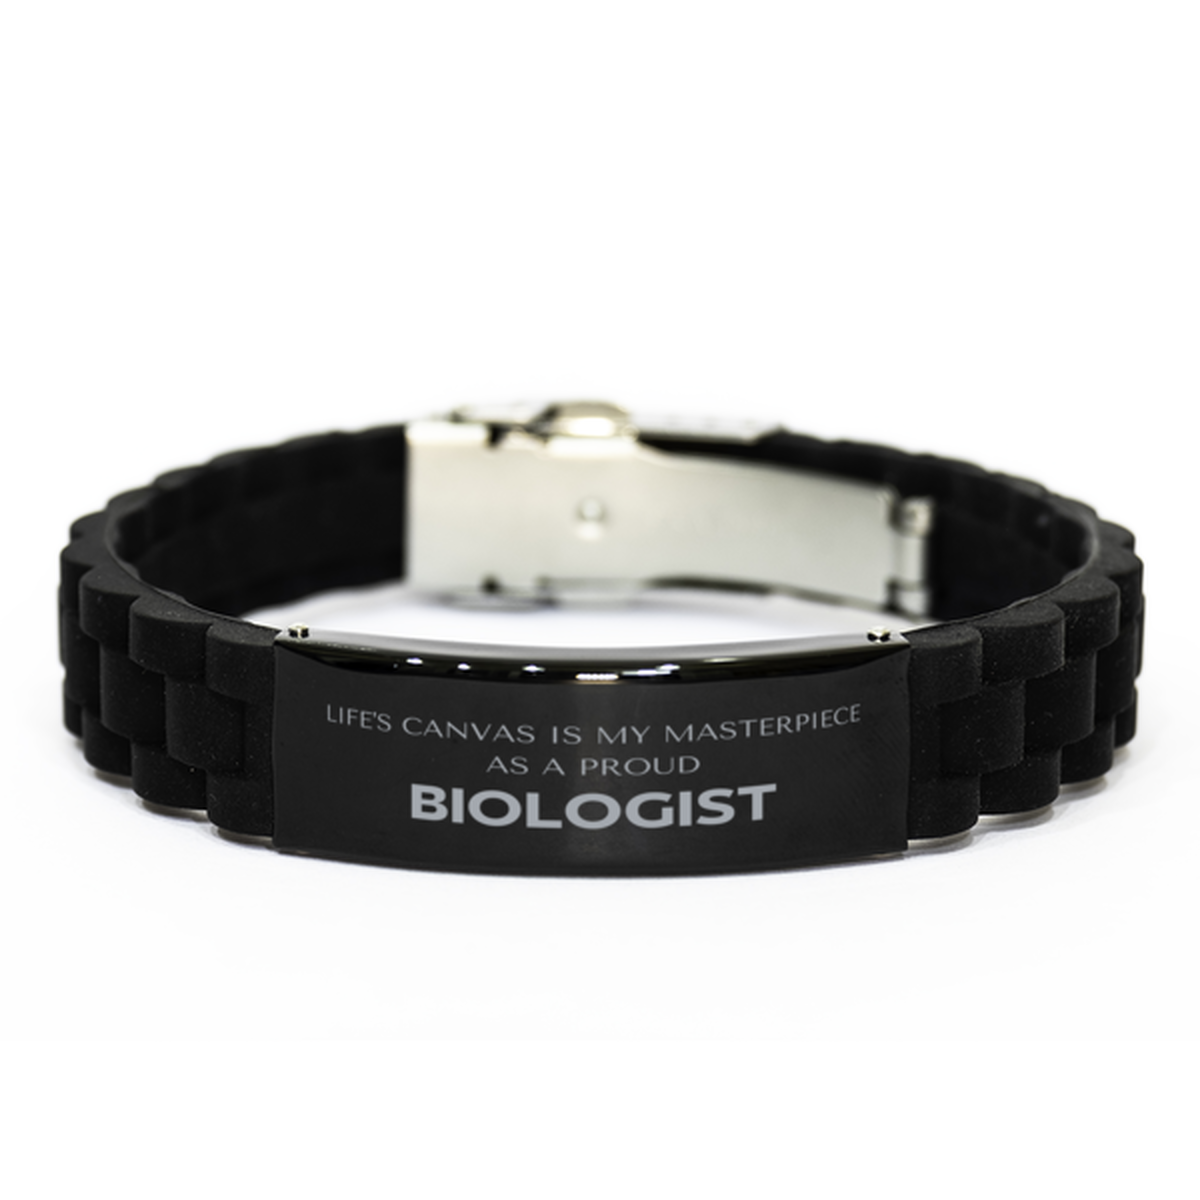 Proud Biologist Gifts, Life's canvas is my masterpiece, Epic Birthday Christmas Unique Black Glidelock Clasp Bracelet For Biologist, Coworkers, Men, Women, Friends